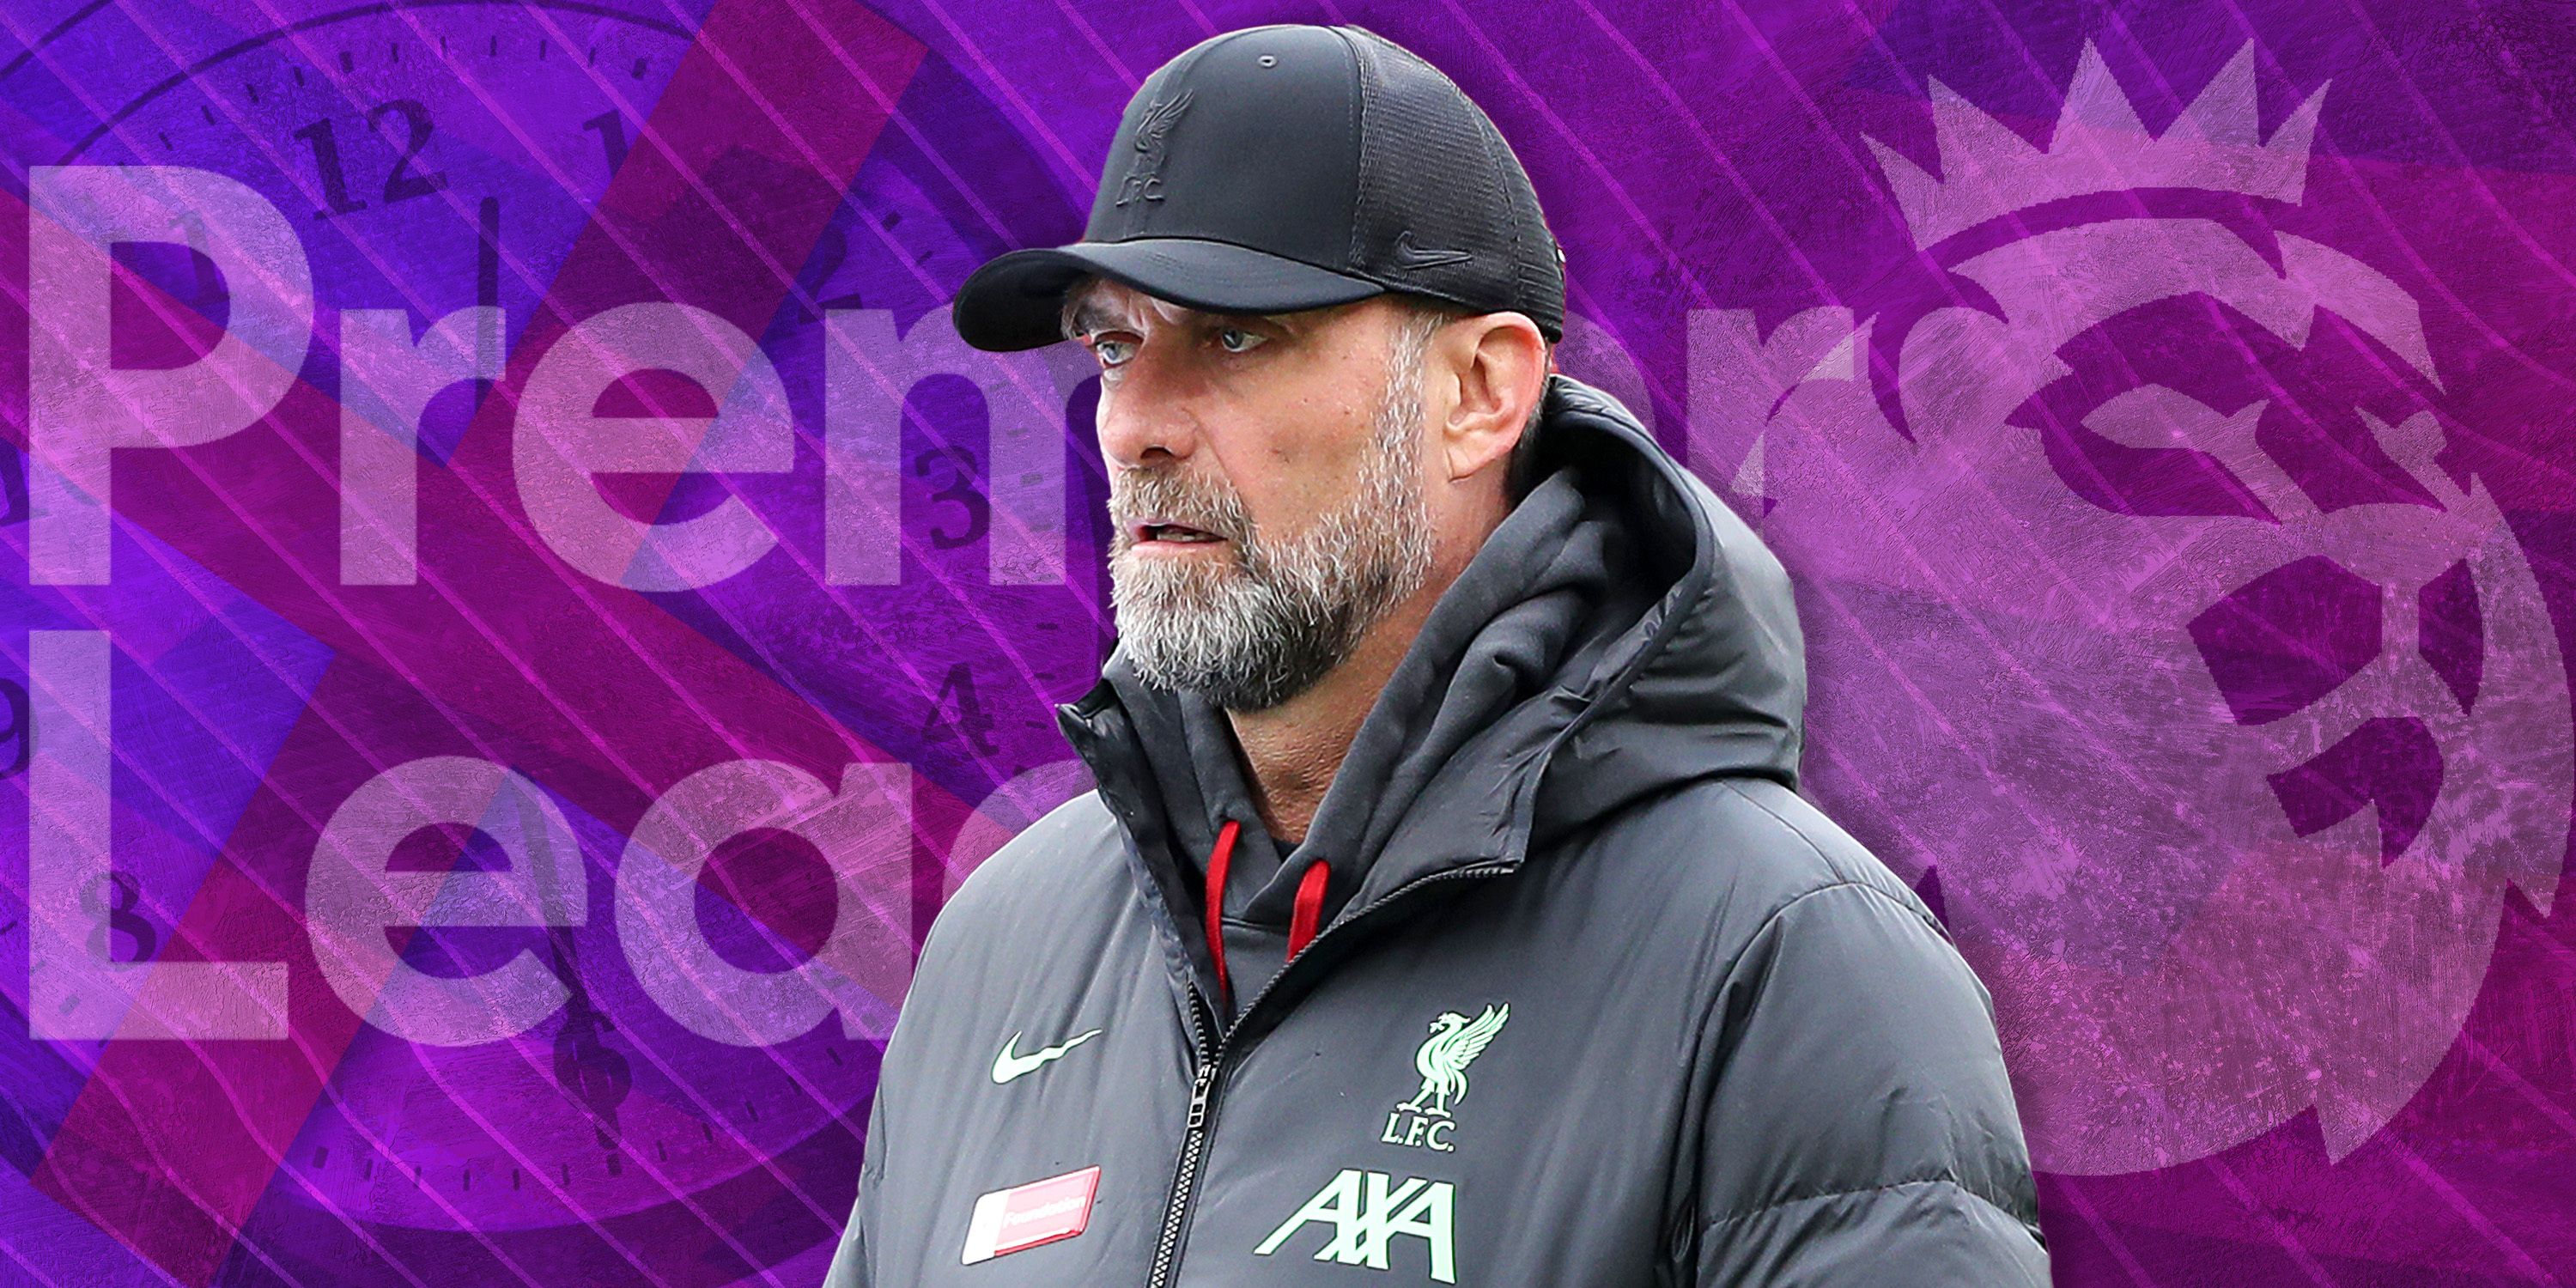 A Premier League logo, Jurgen Klopp looking confused, and a clock with an X across it